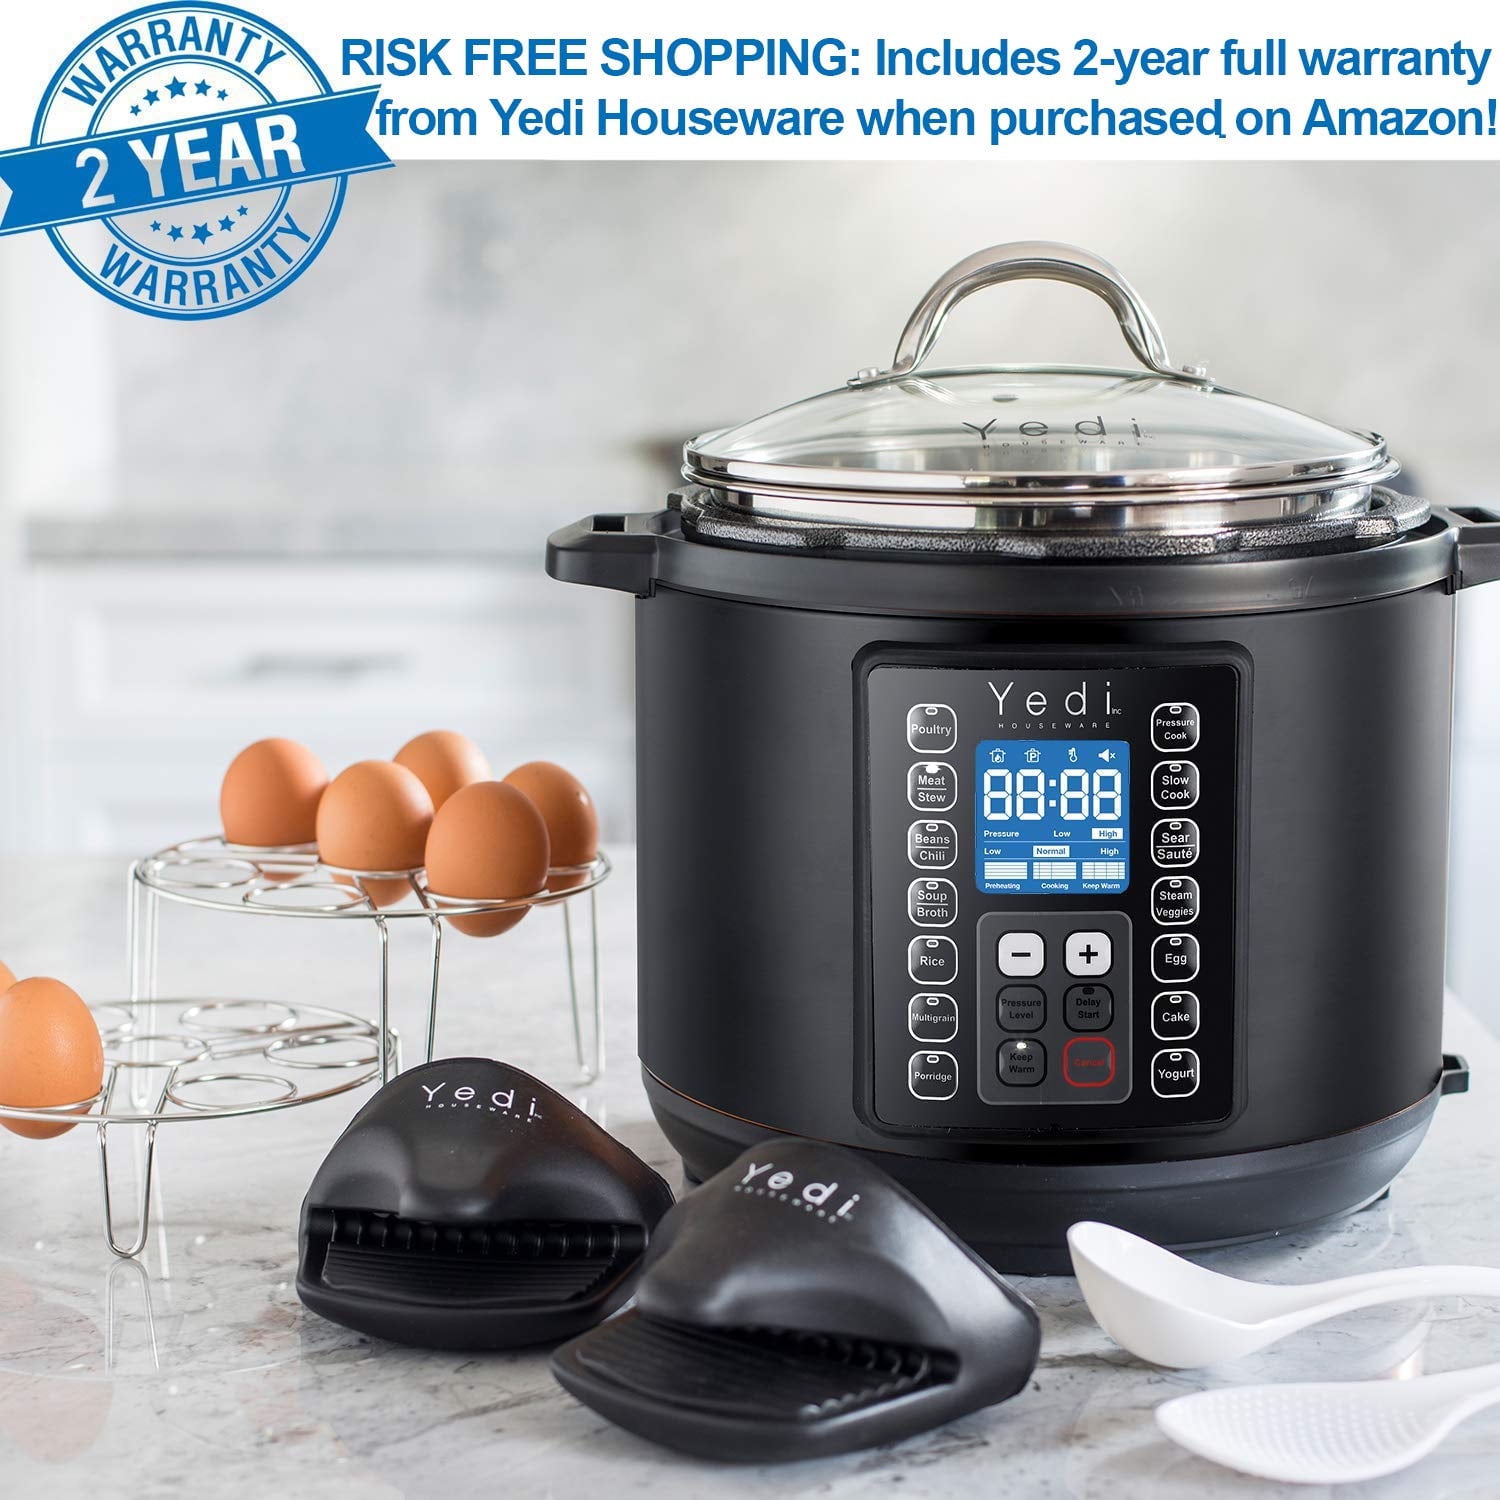 Yedi 9-in-1 Total Package Instant Programmable Pressure Cooker, Deluxe  Accessory kit, Recipes, Pressure Cook, Slow Cook, Rice Cooker, Yogurt  Maker